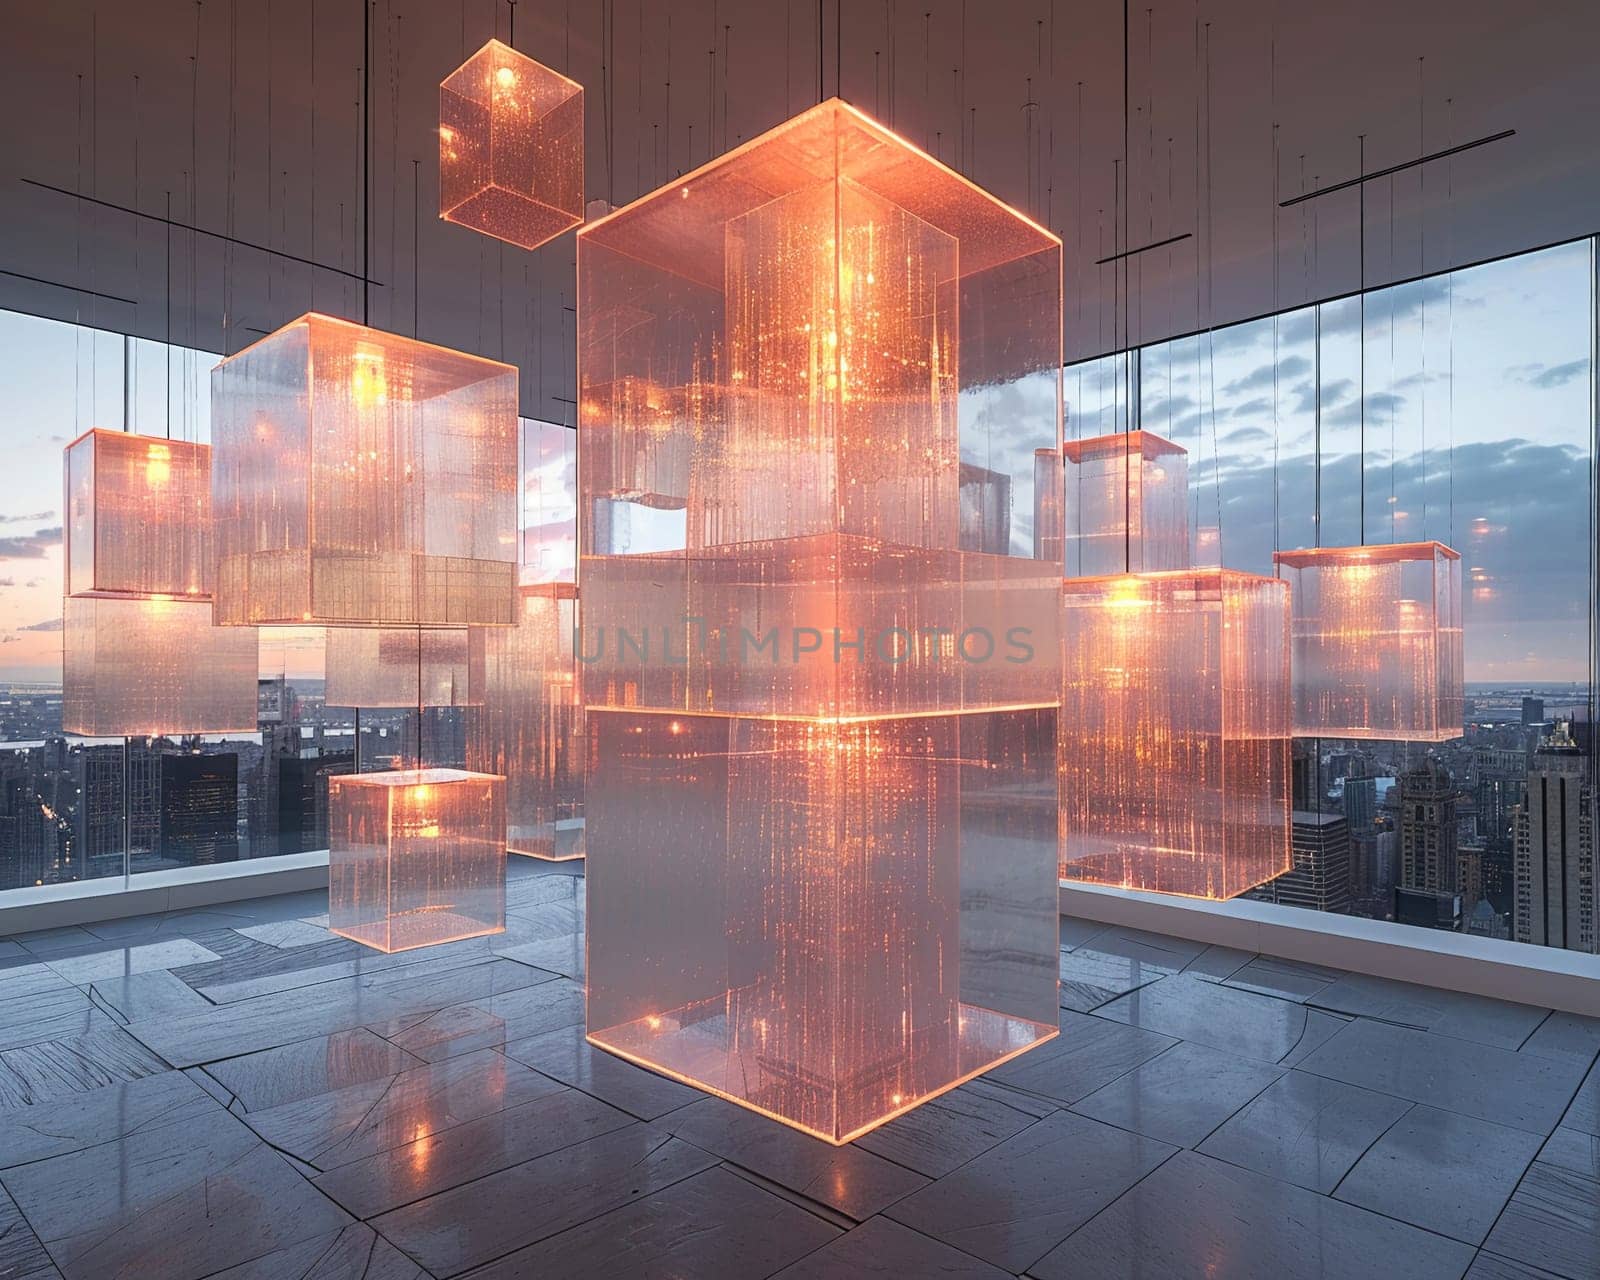 Suspended Glass Cubes Against a Soft Focus City Skyline The cubes seem to float against the urban backdrop by Benzoix